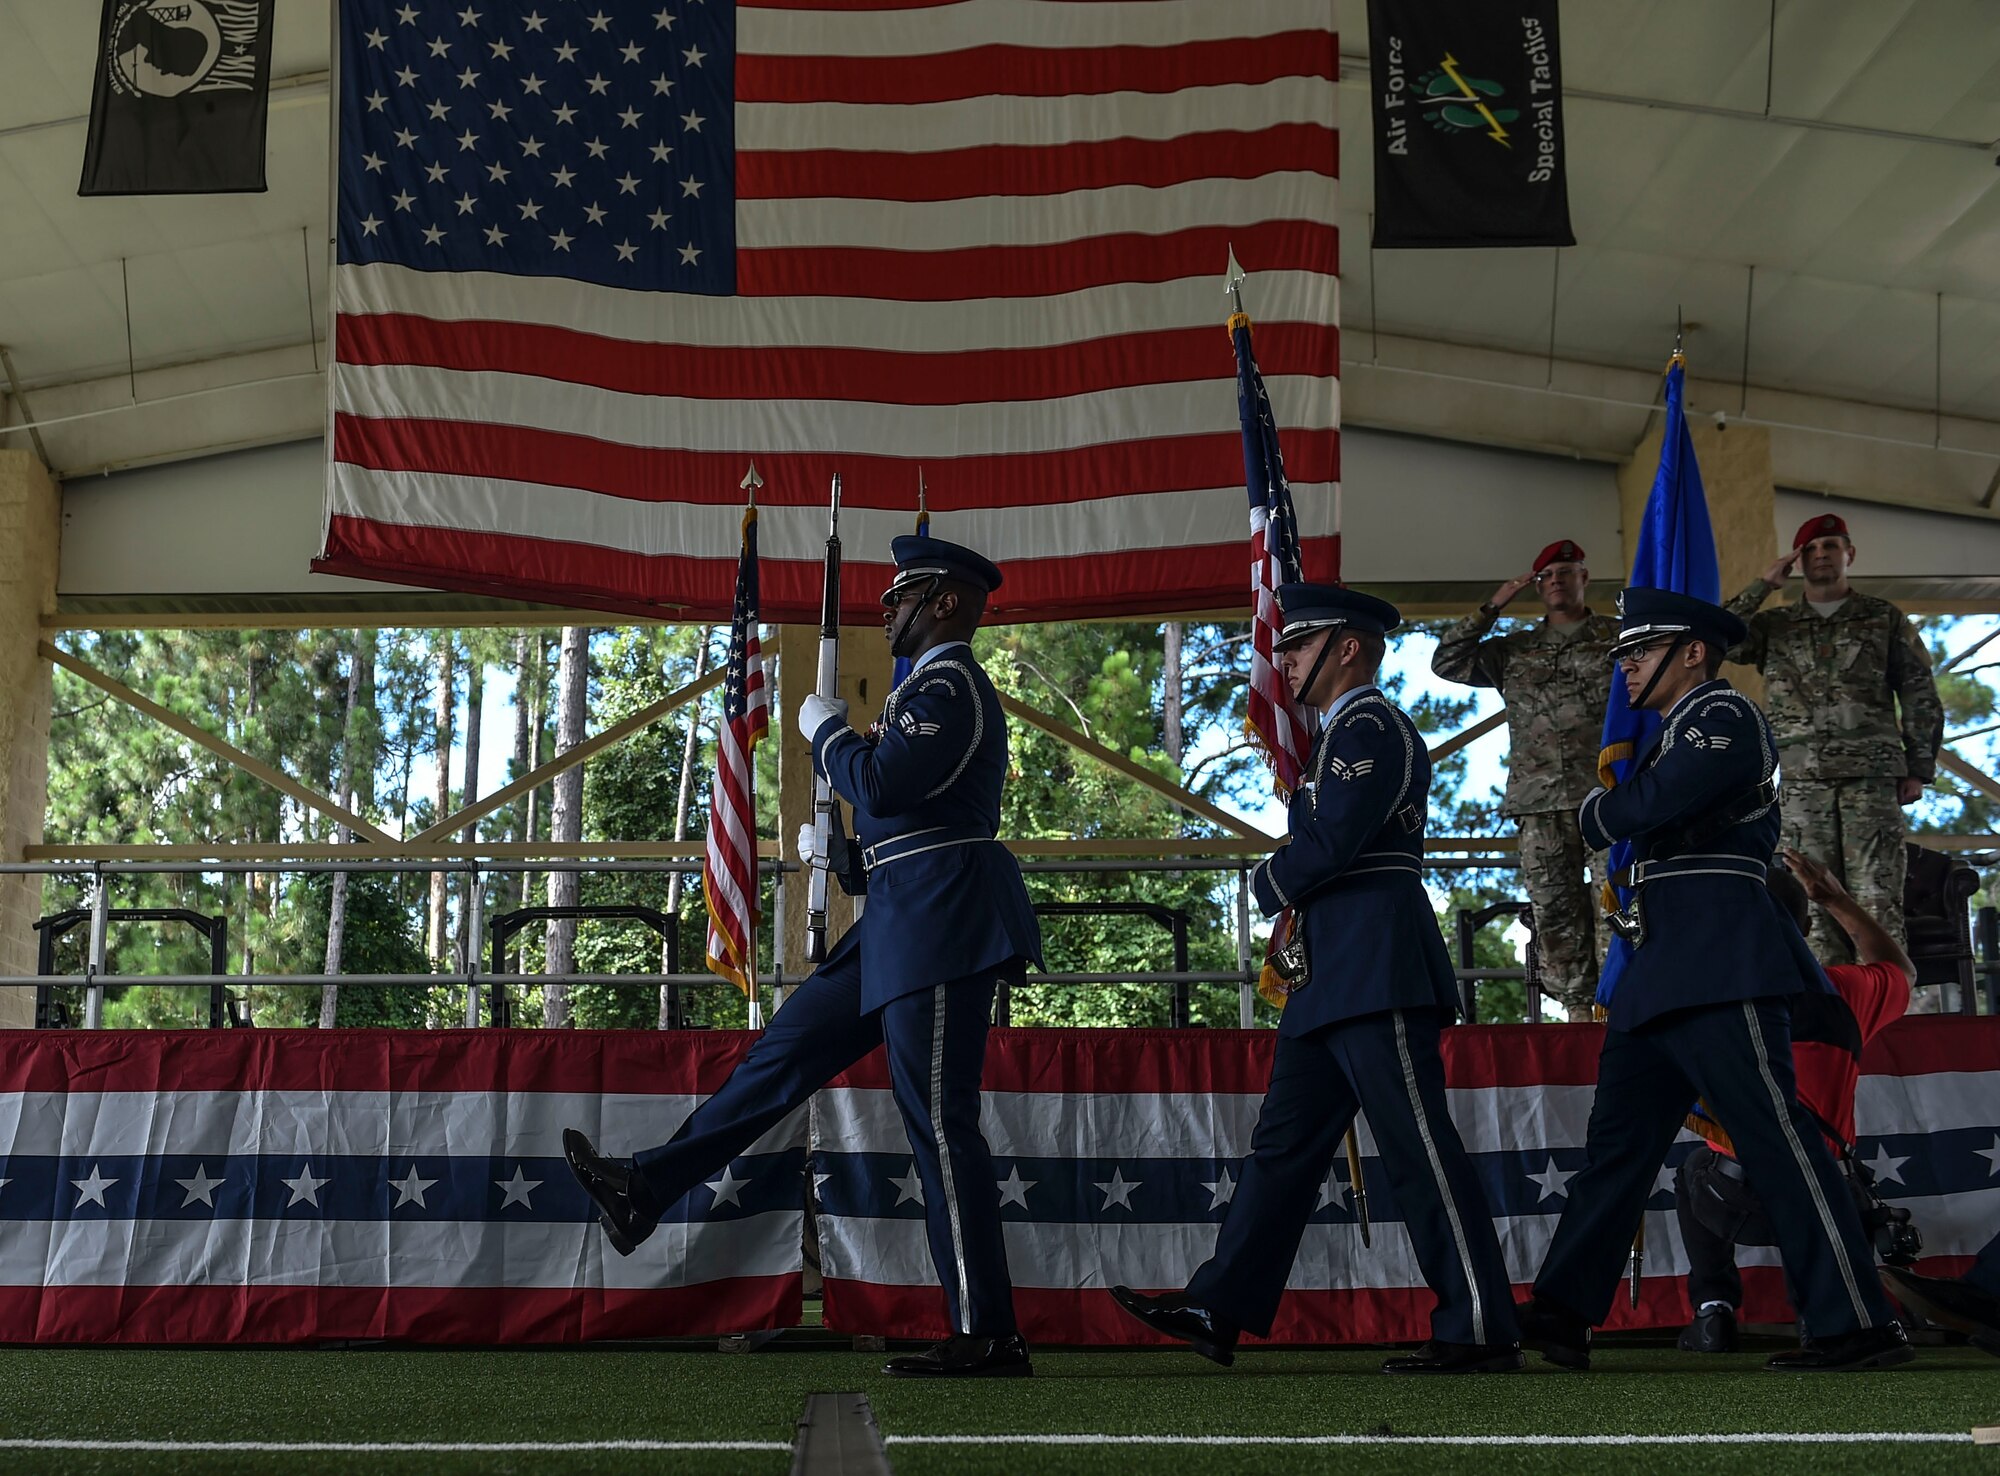 The Hurlburt Field Honor Guard posts the colors during a retirement ceremony at Hurlburt Field, Fla., July 15, 2016. Chief Master Sgt. Sean Gleffe, combat control functional manager of Air Force Special Operations Command, retired after 30 years as a Special Tactics combat controller. Gleffe also served as the interim command chief of the 24th SOW.  Throughout his Special Tactics career, Gleffe was certified a static line jump master, military freefall jump master and military dive supervisor. (U.S. Air Force photo by Senior Airman Ryan Conroy)